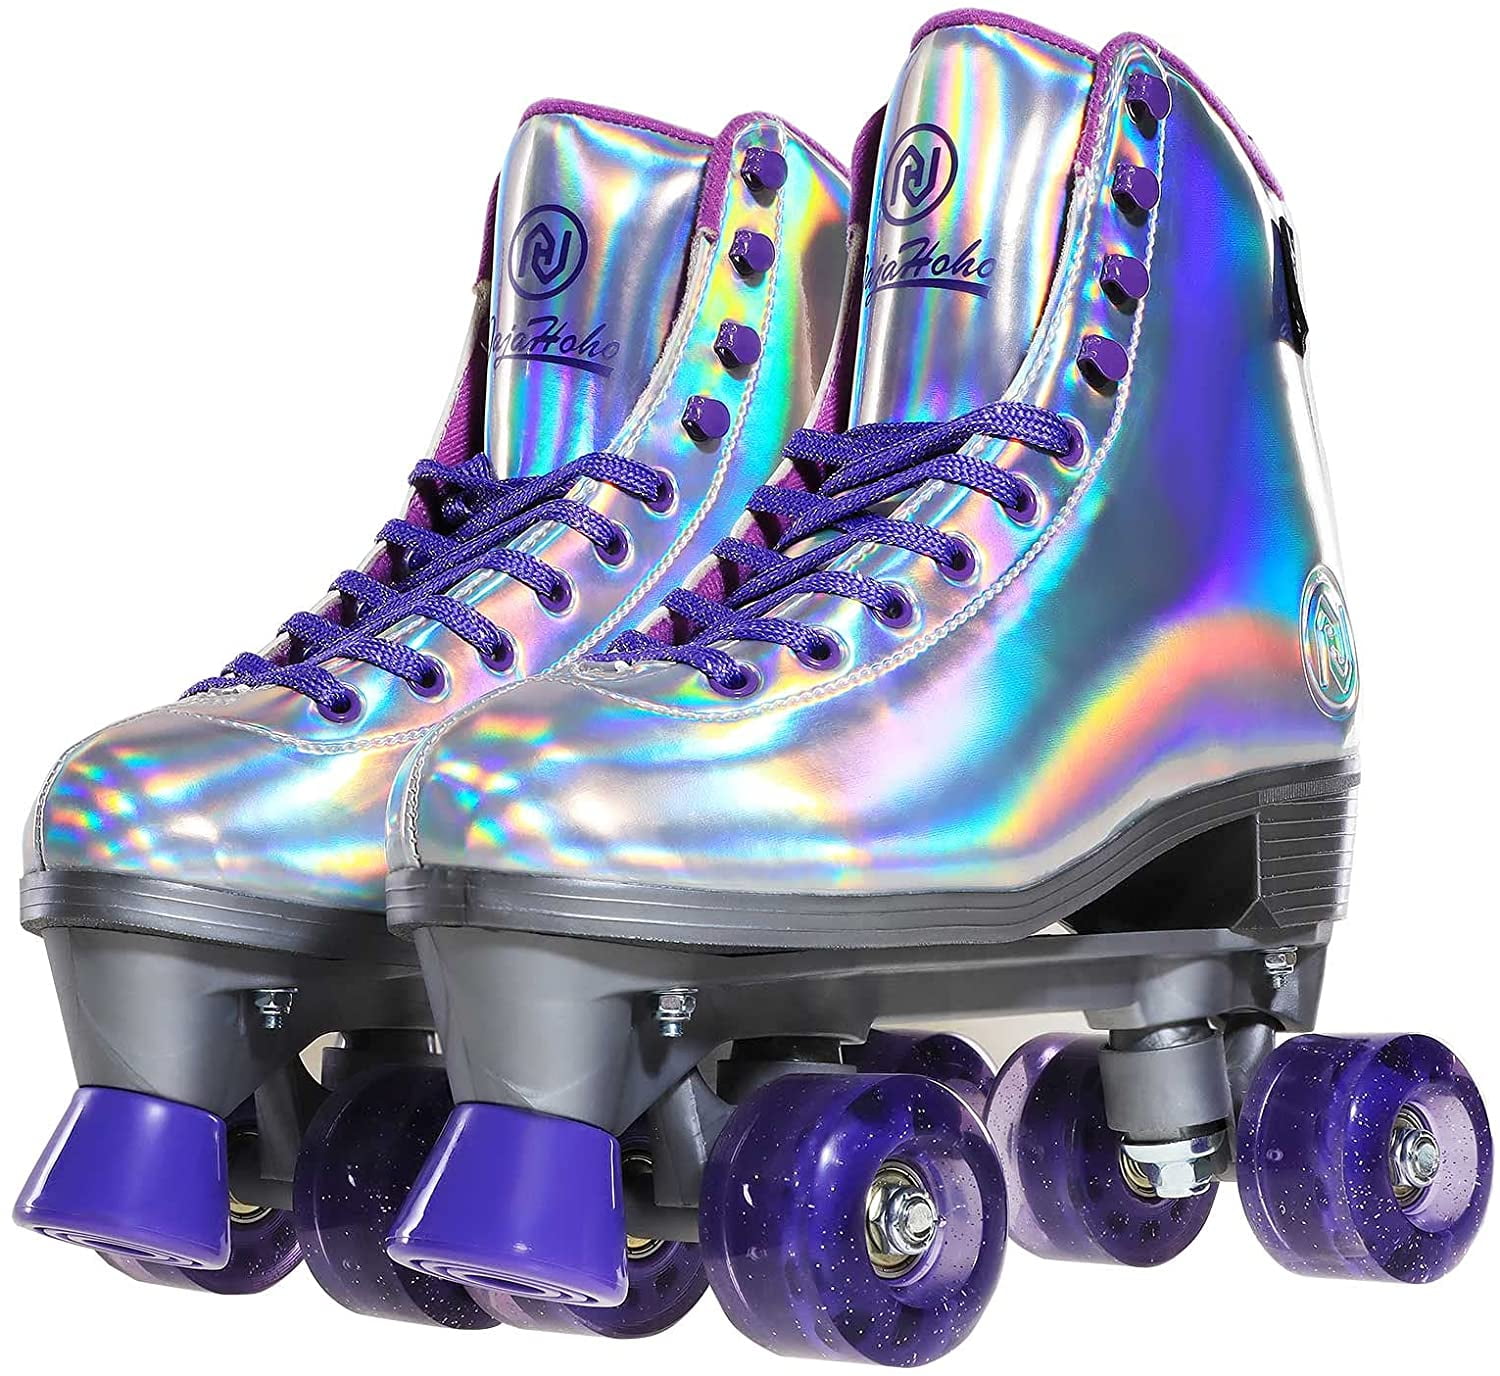 Gets Women's Roller Skates PU Leather High-top Roller Skates Four-Wheel Roller Skates Double Row Shiny Roller Skates for Indoor Outdoor